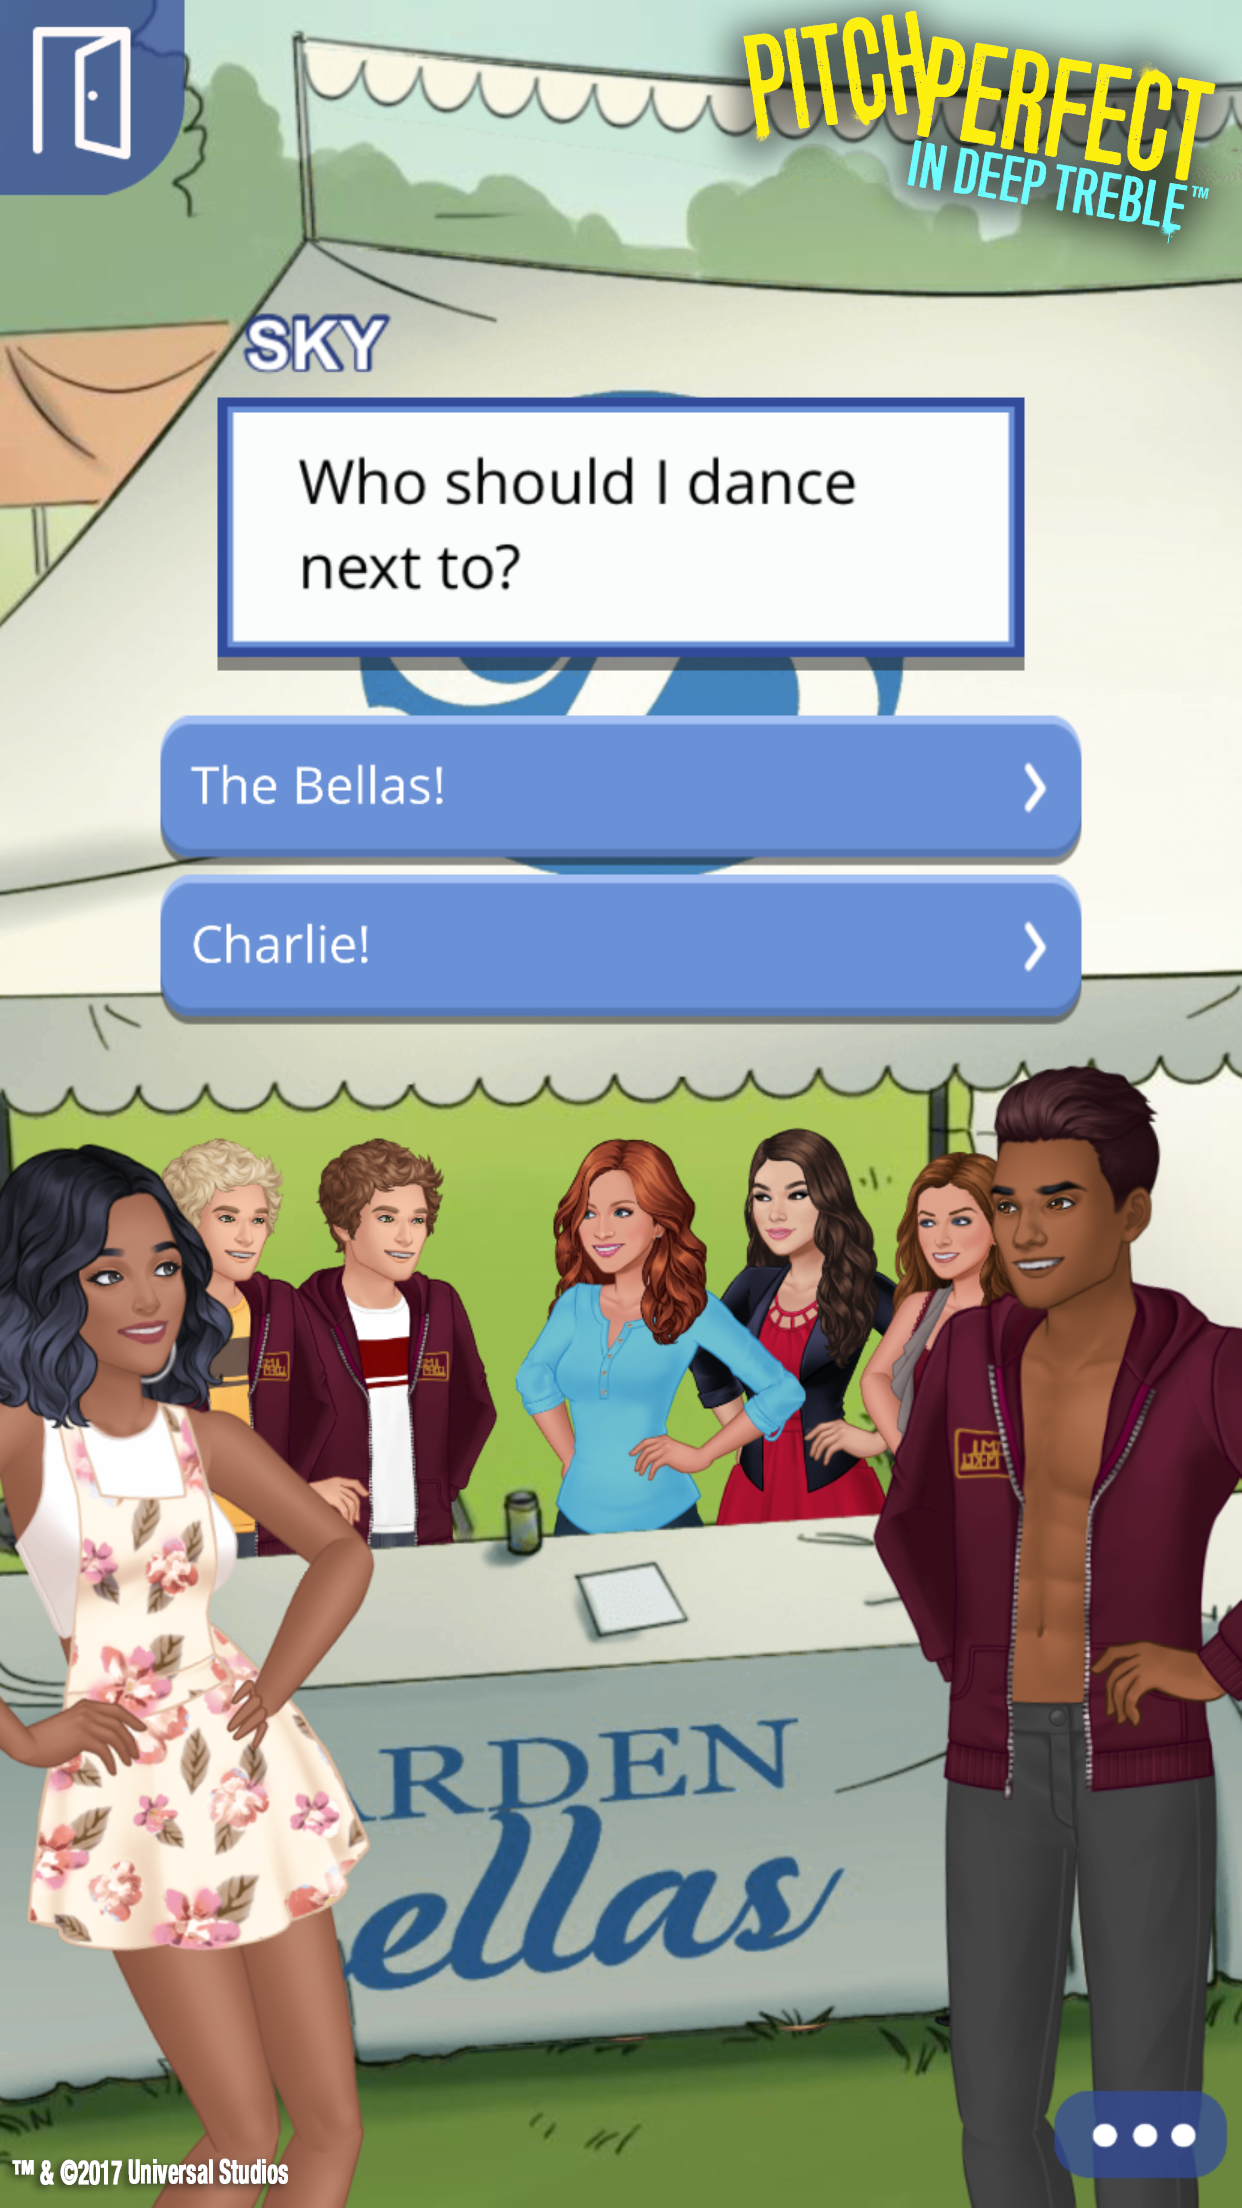 Pocket Gems launches Pitch Perfect interactive mobile story